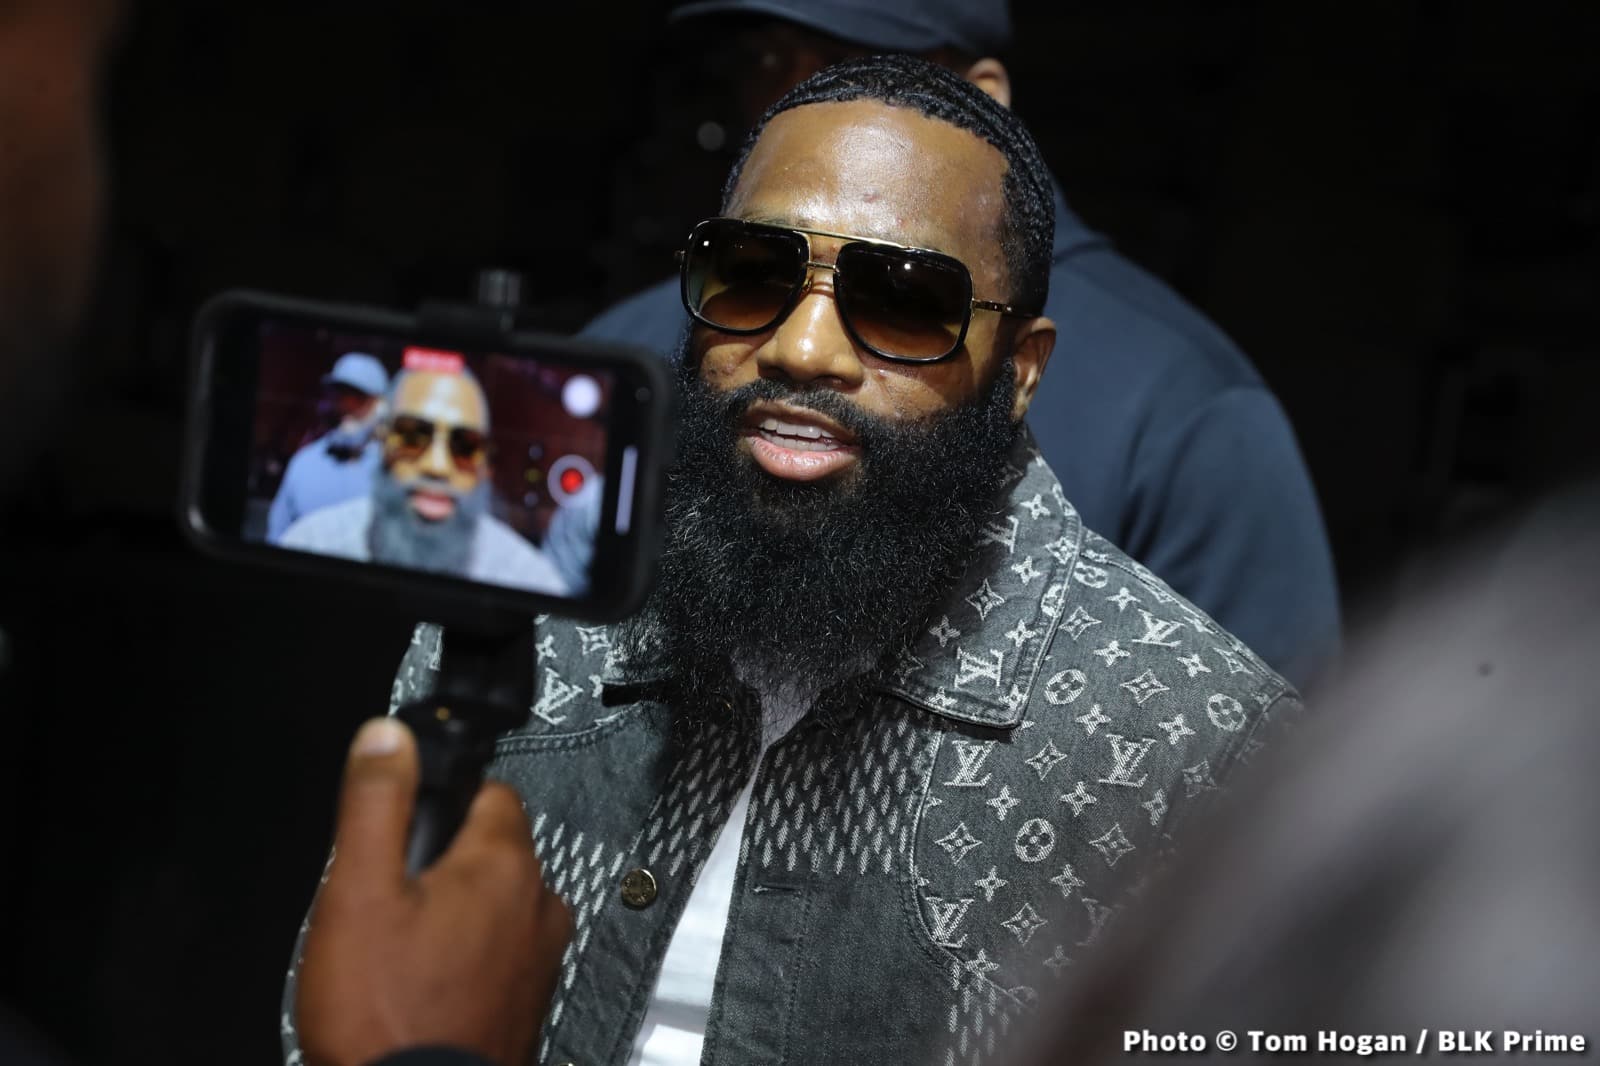 Adrien Broner says he'll be champion in next 2 fights, wants Regis Prograis first